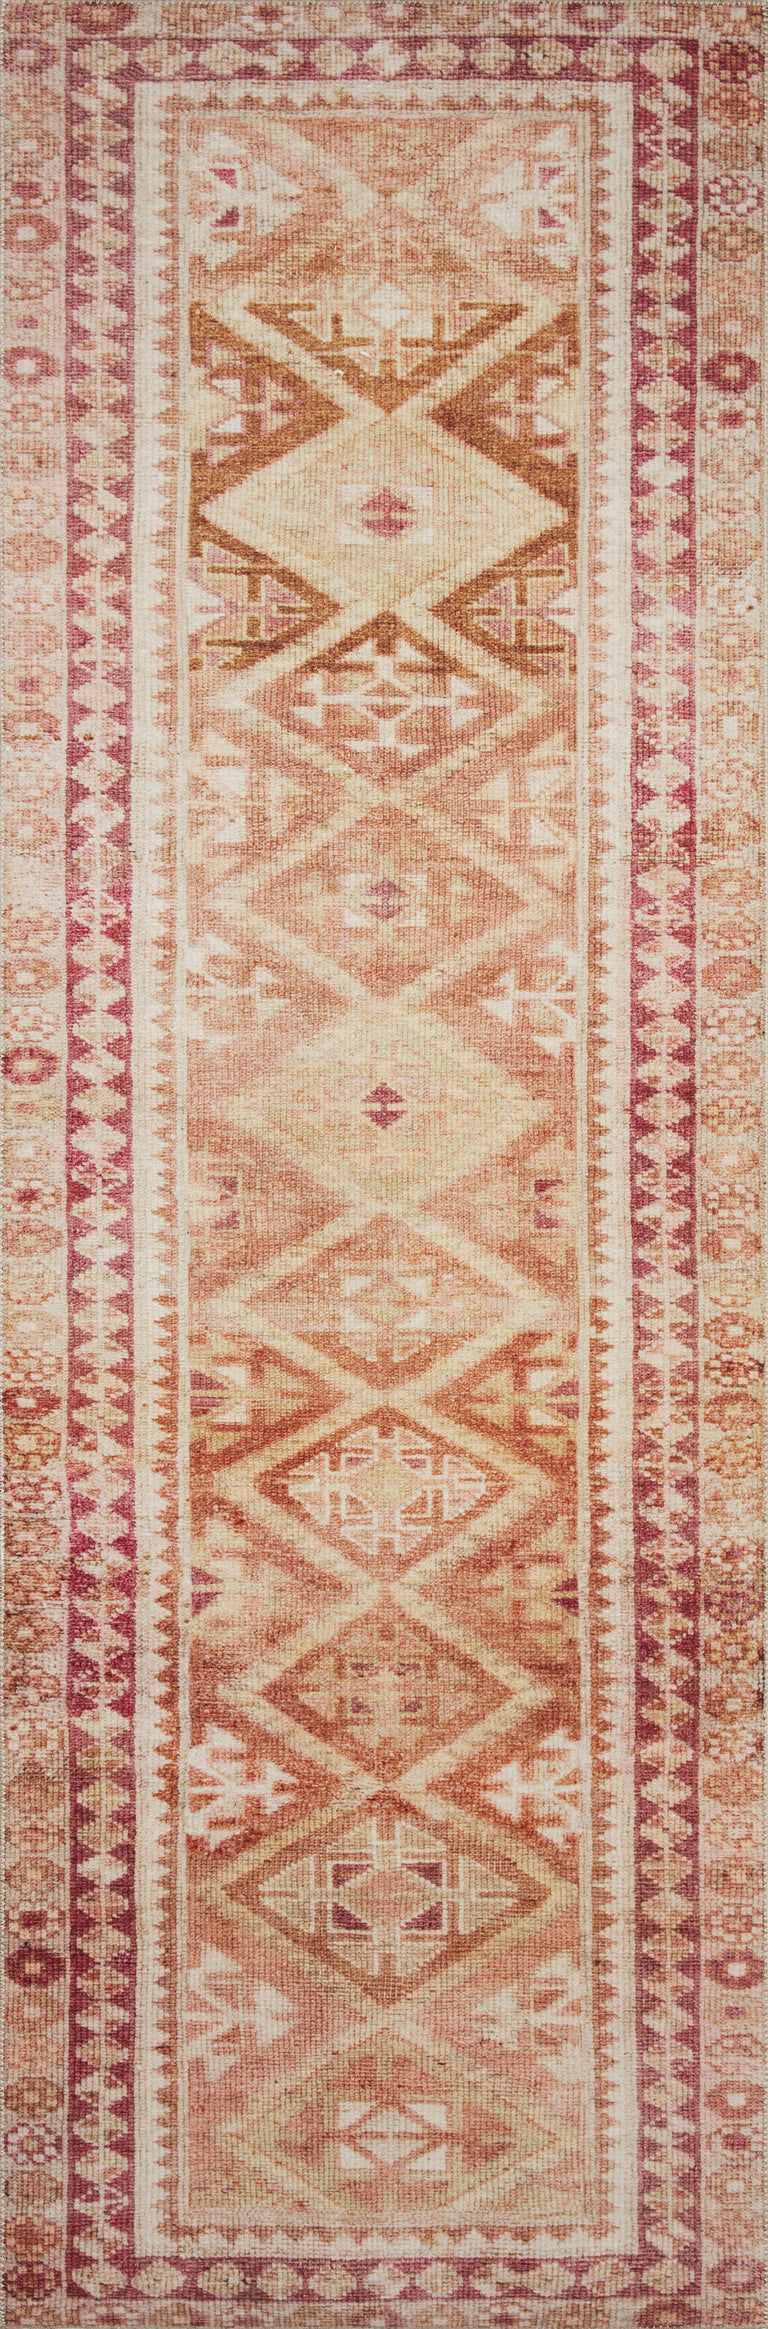 Loloi II Layla Collection Rug in Natural, Spice - 9'0" x 12'0"